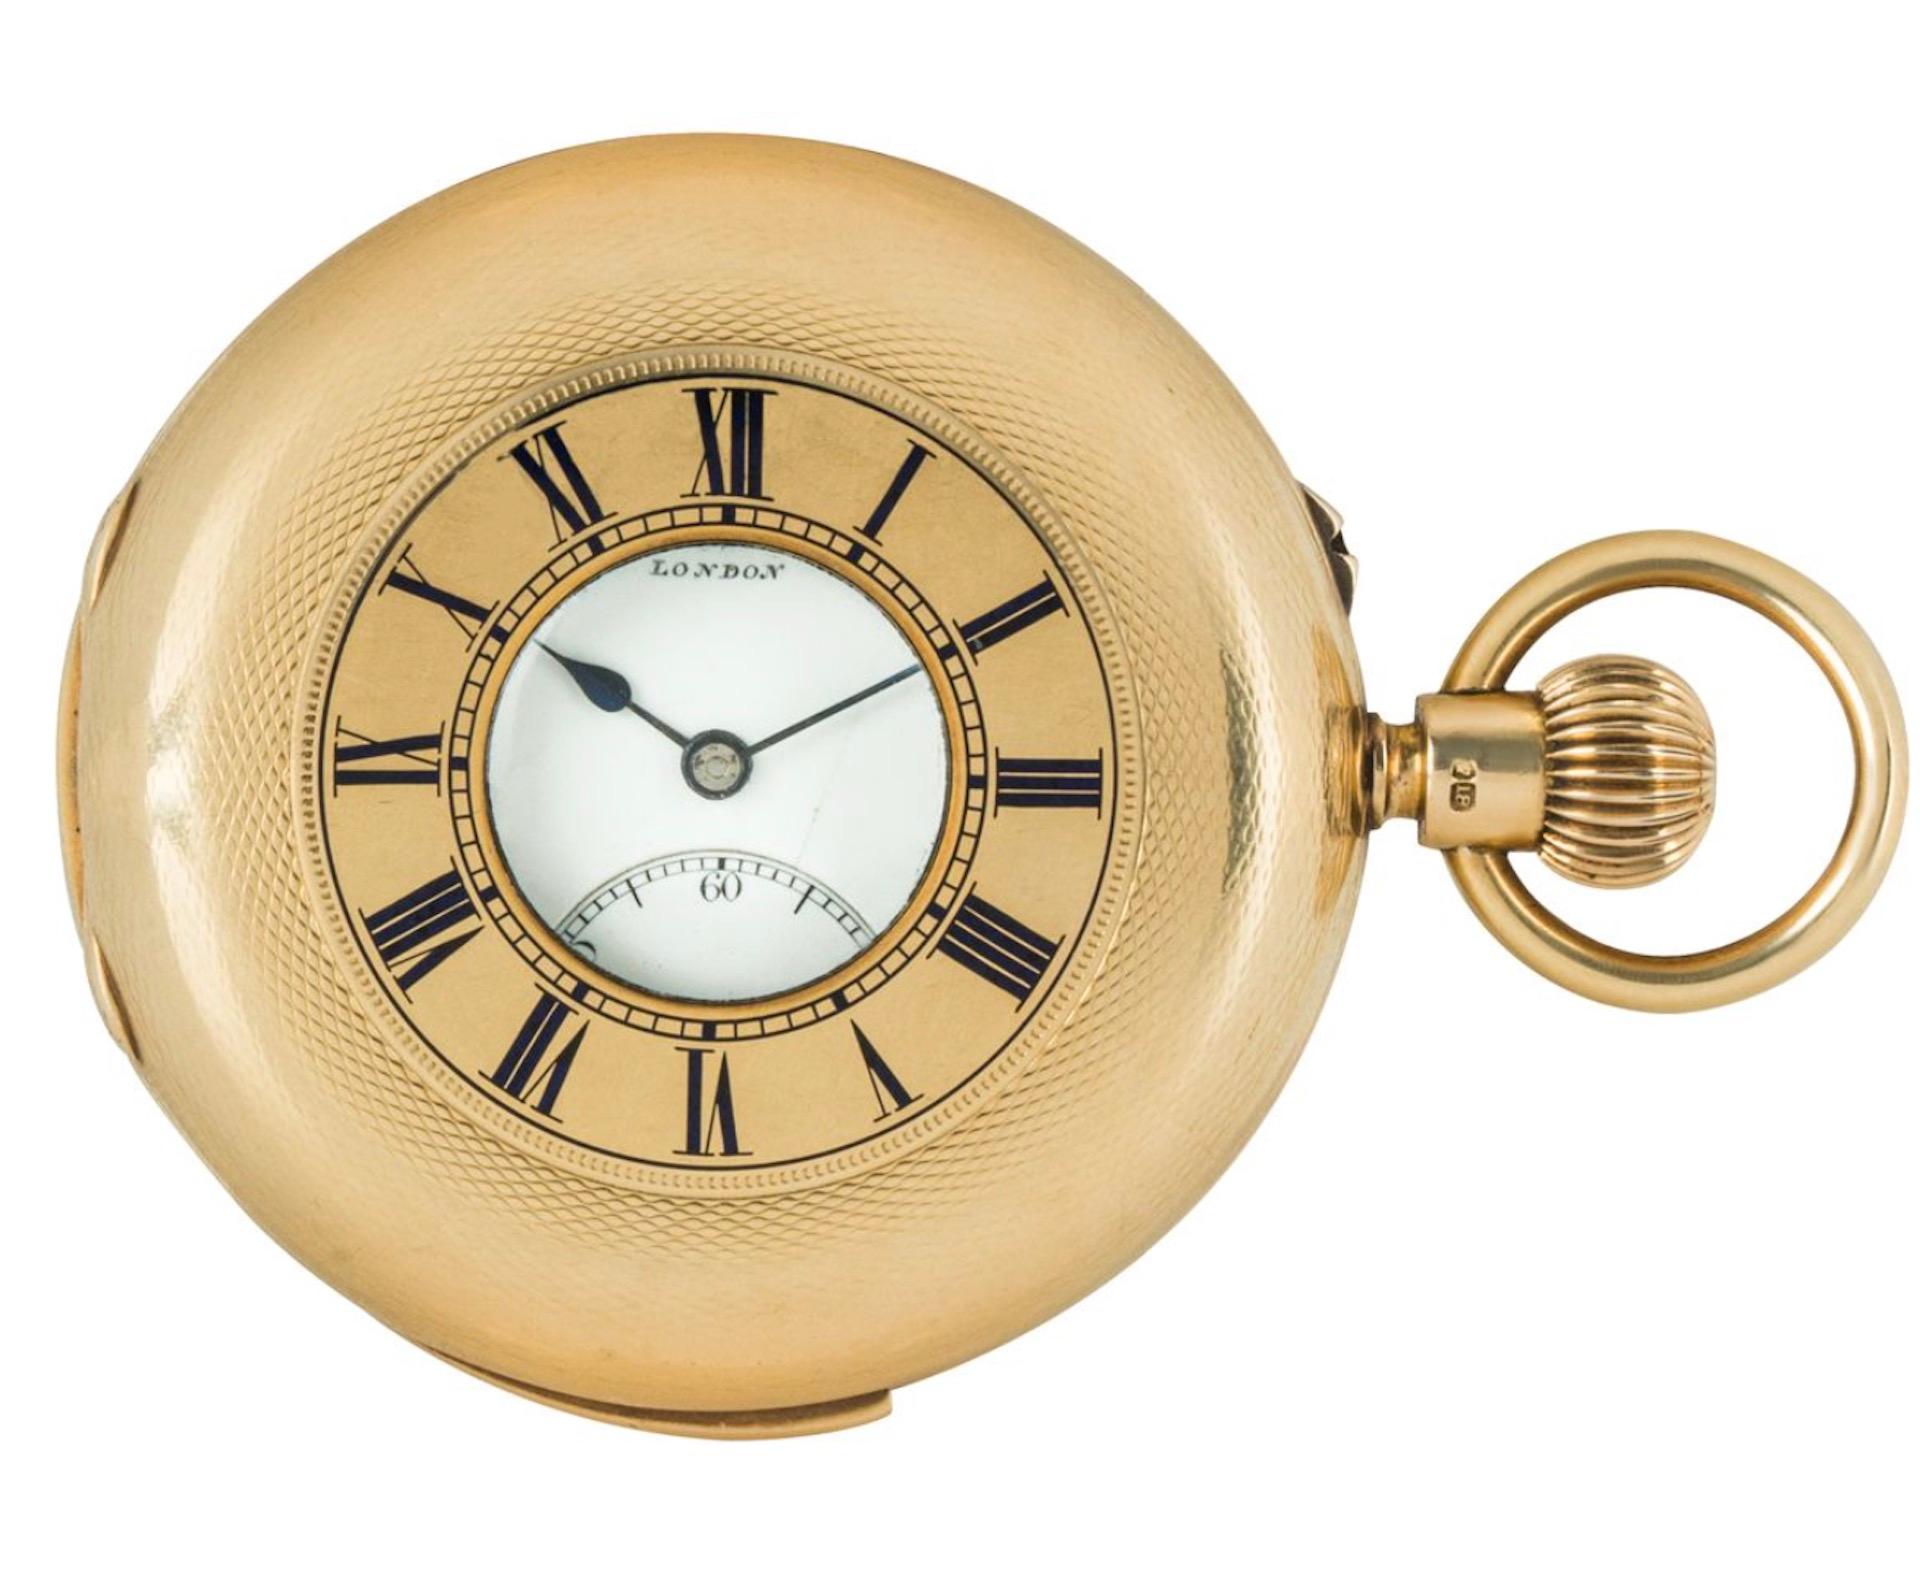 A John Cashmore 18ct yellow gold, half quarter repeater keyless lever half hunter pocket watch, C1893.

Dial: The white enamel Roman numeral dial with subsidiary seconds dial outer minute track signed John Cashmore London. The original blued steel